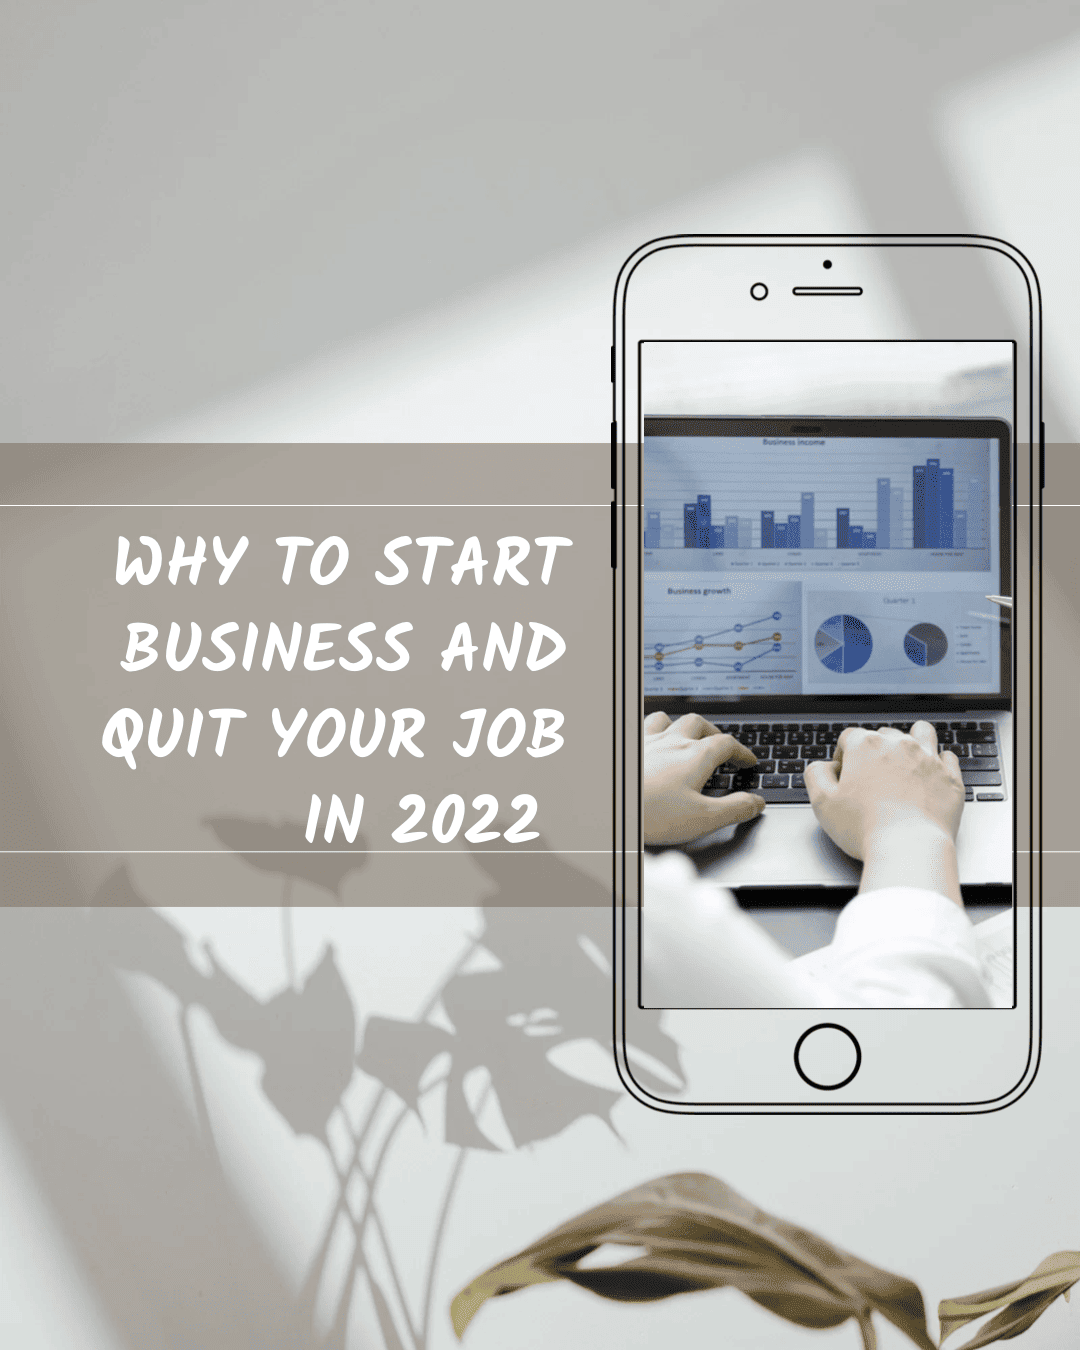 Why to start business and quit your job